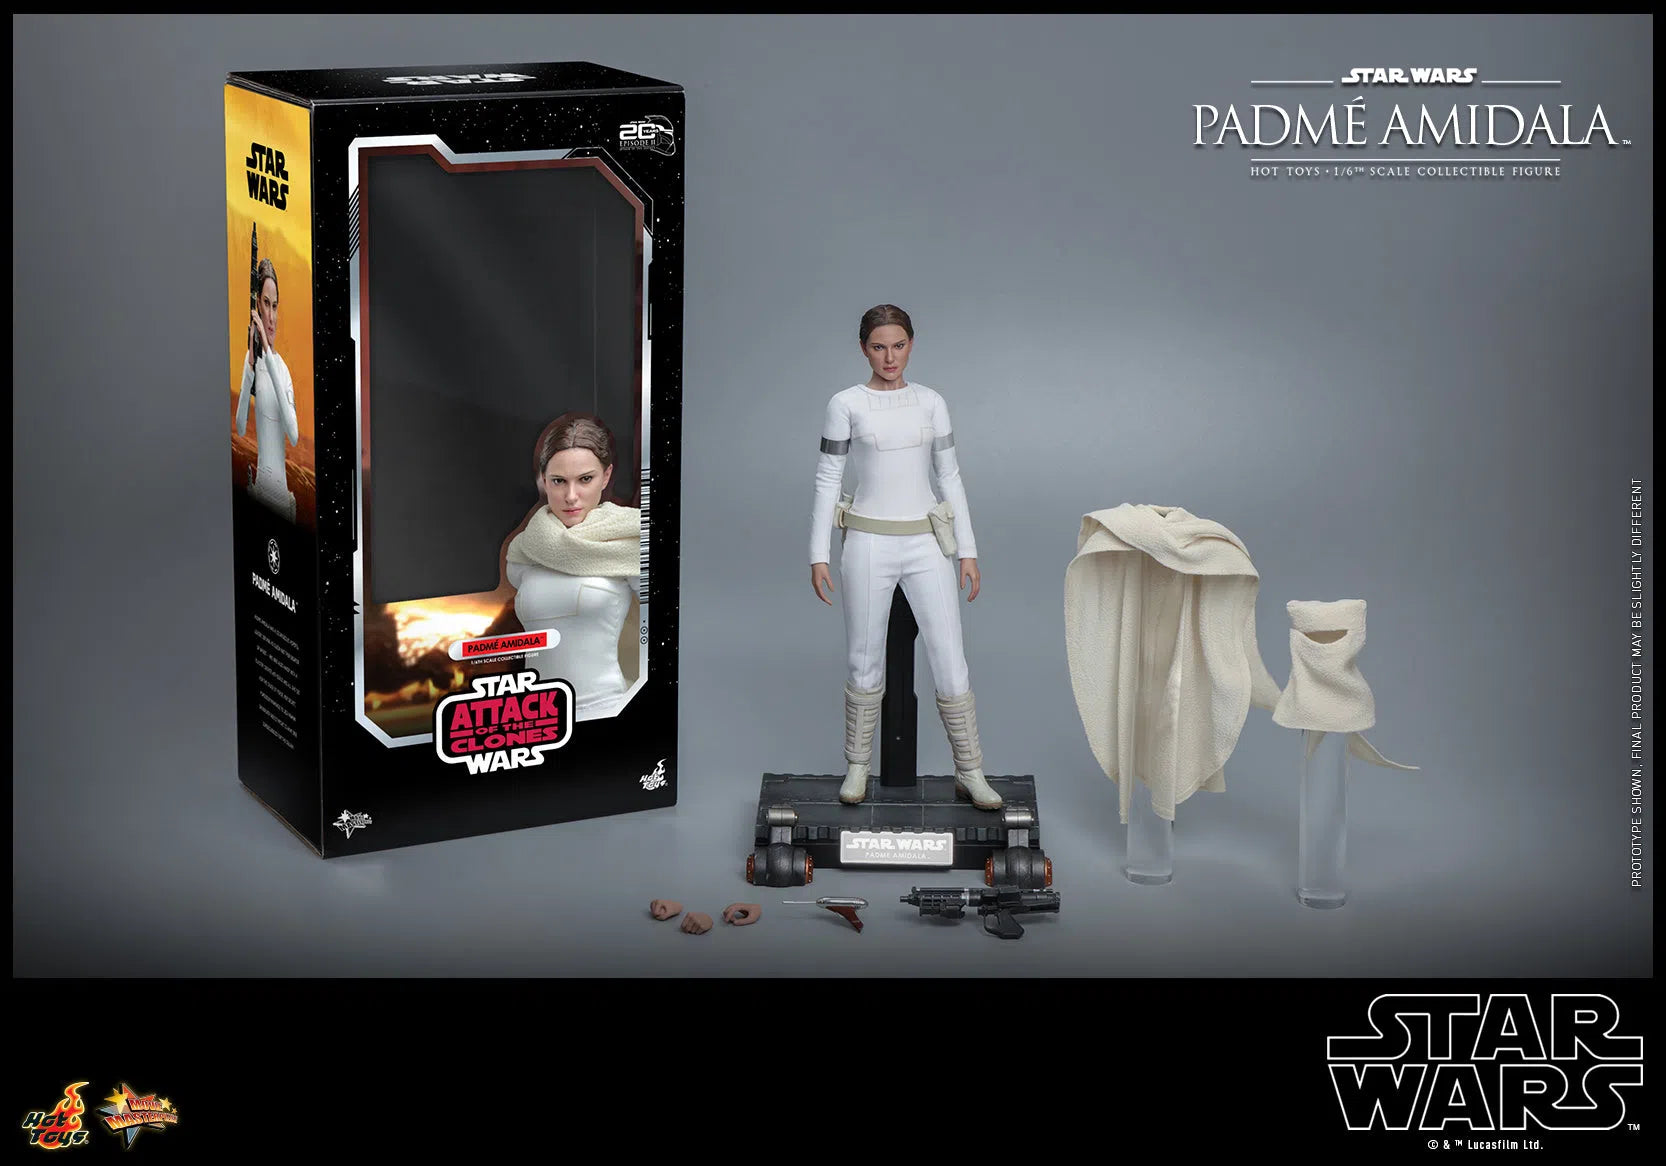 Padme Amidala: Star Wars Episode II: Attack Of The Clones: Hot Toys